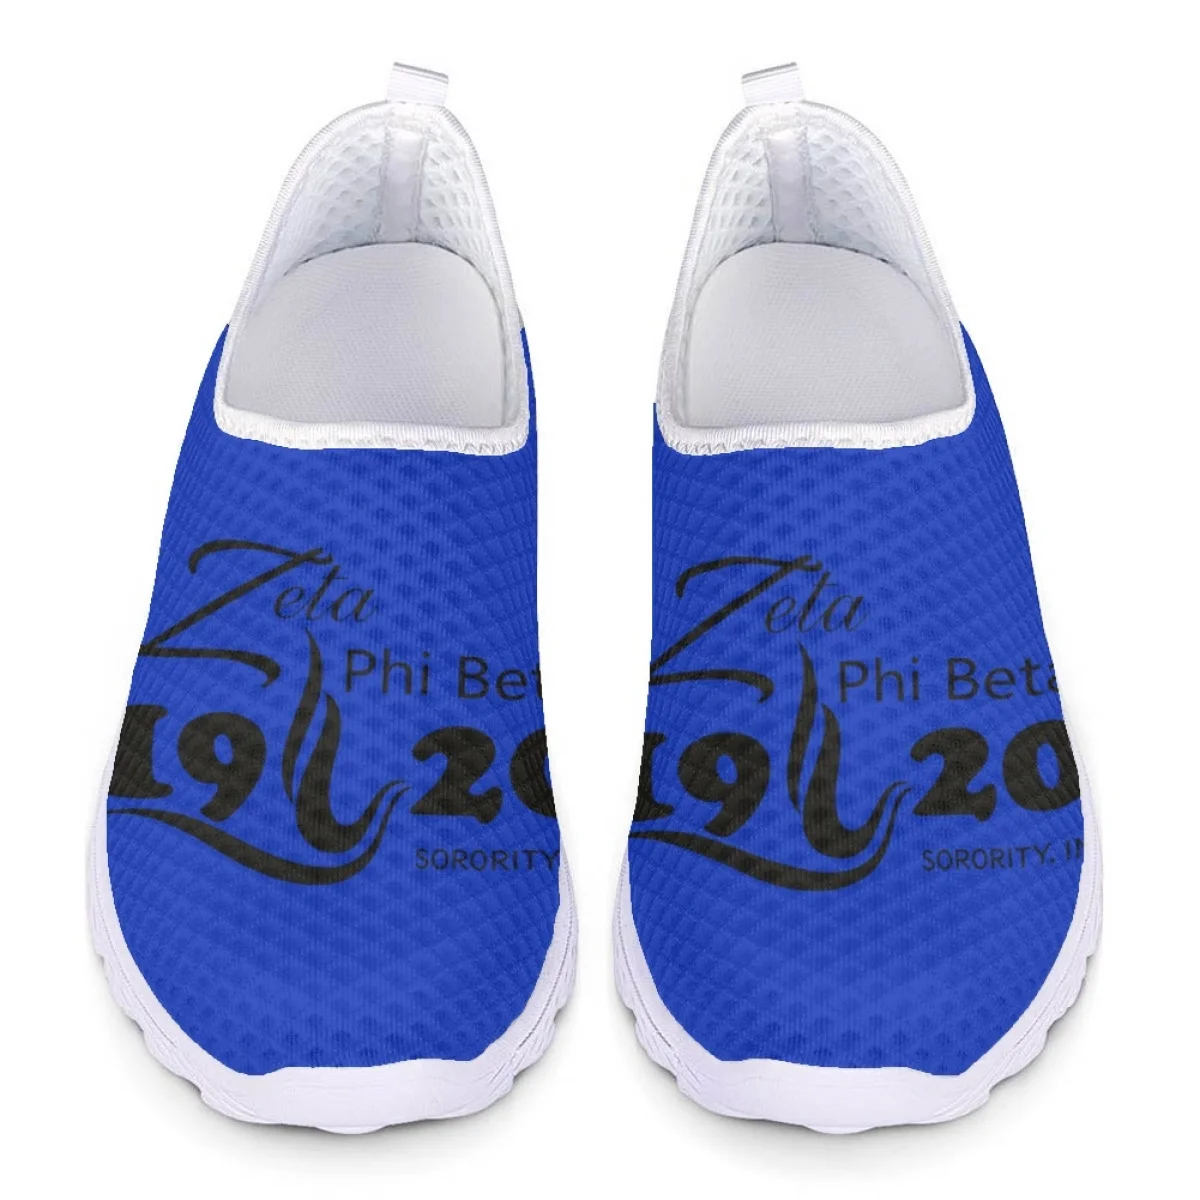 

Nopersonality Breathable Mesh Sneakers Women's Flat Sports Easy Wear Running Shoes Zeta Phi Beta Theme Creative Zapatos Mujer